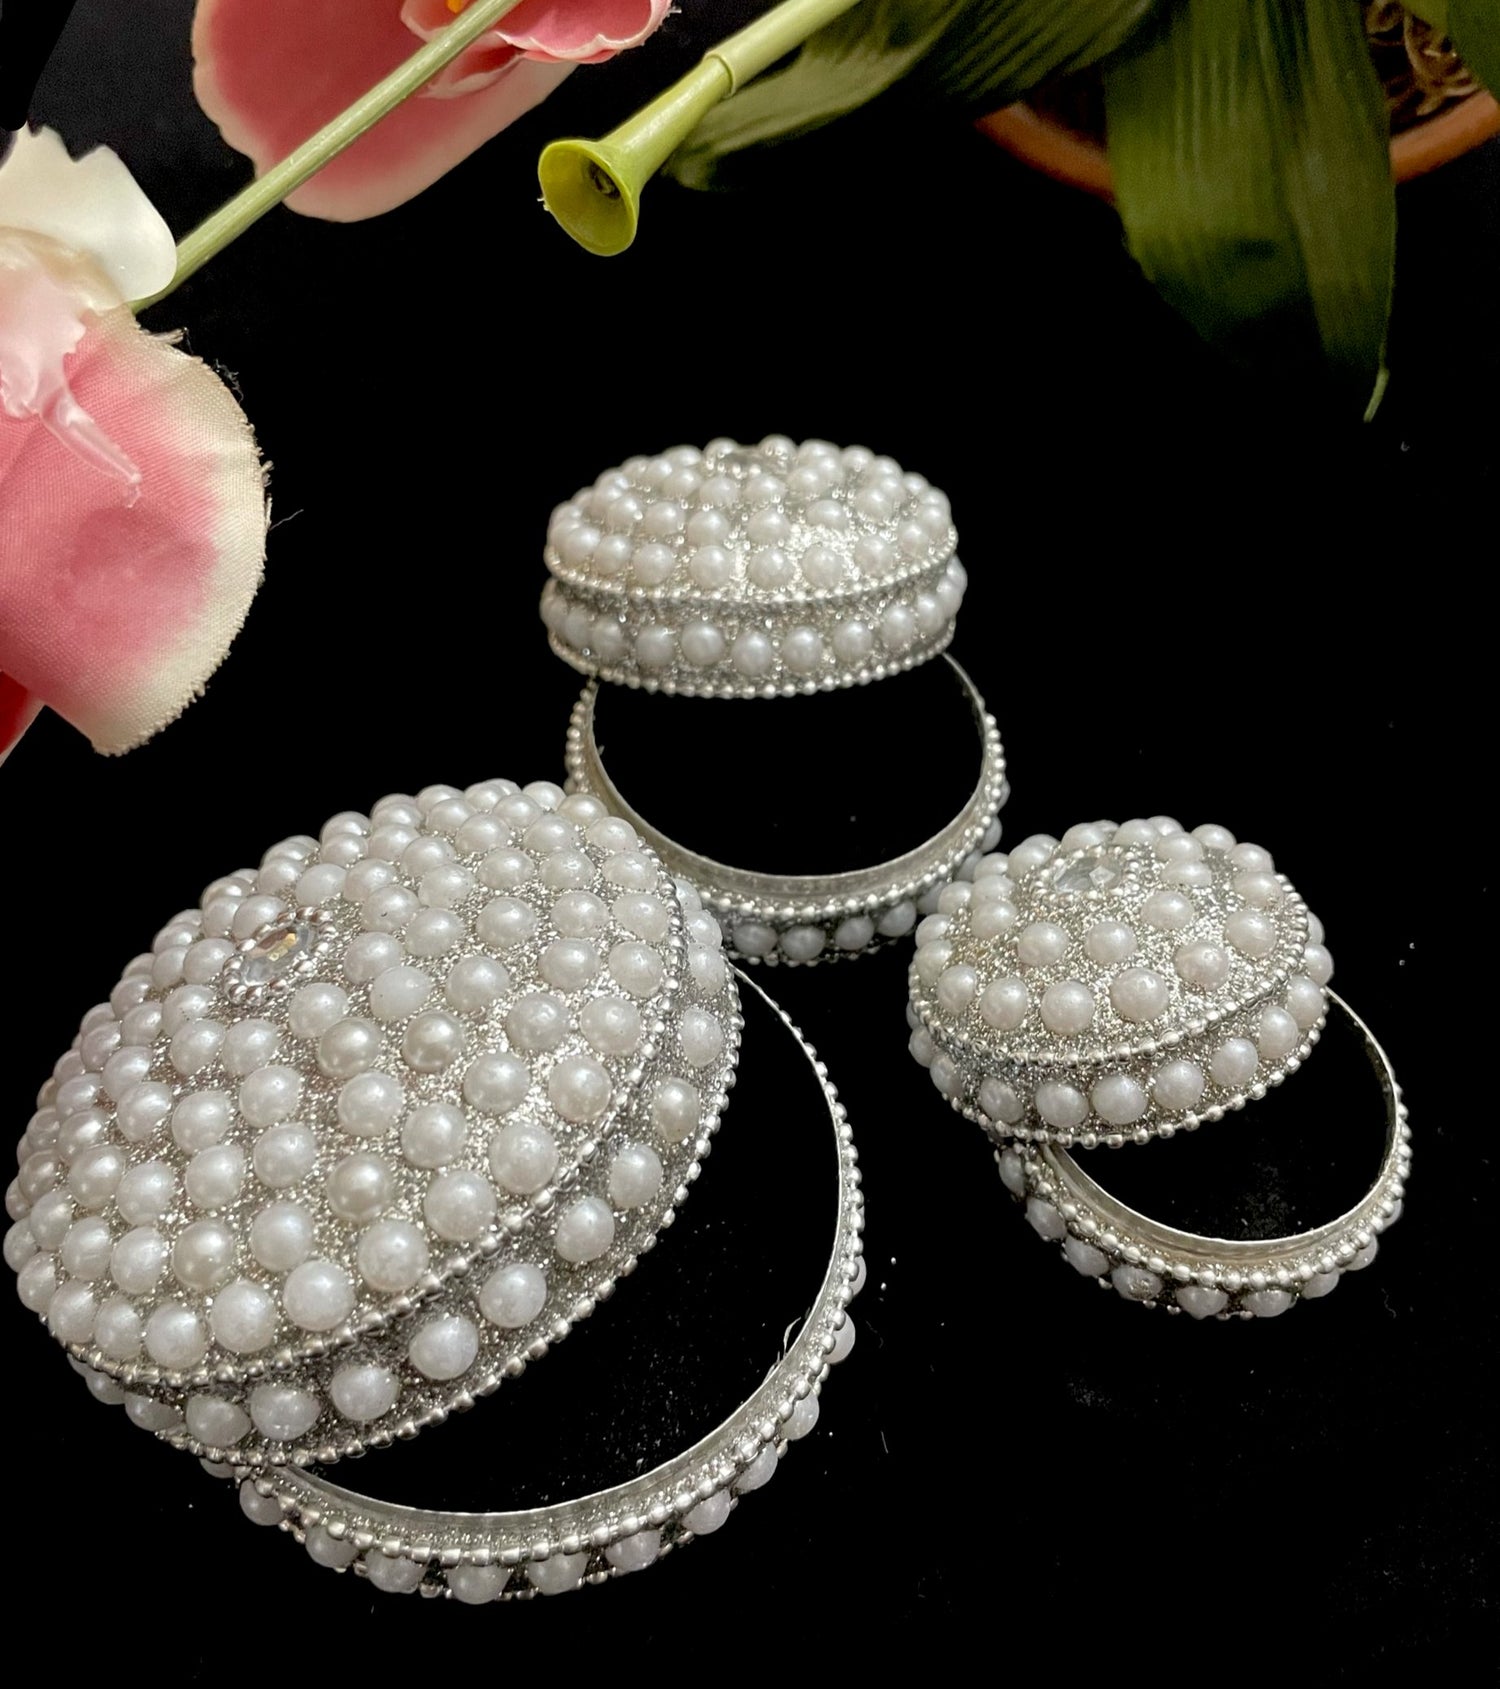 Pearl box set of 3 in 1 Handcrafted nesting gift/ favors